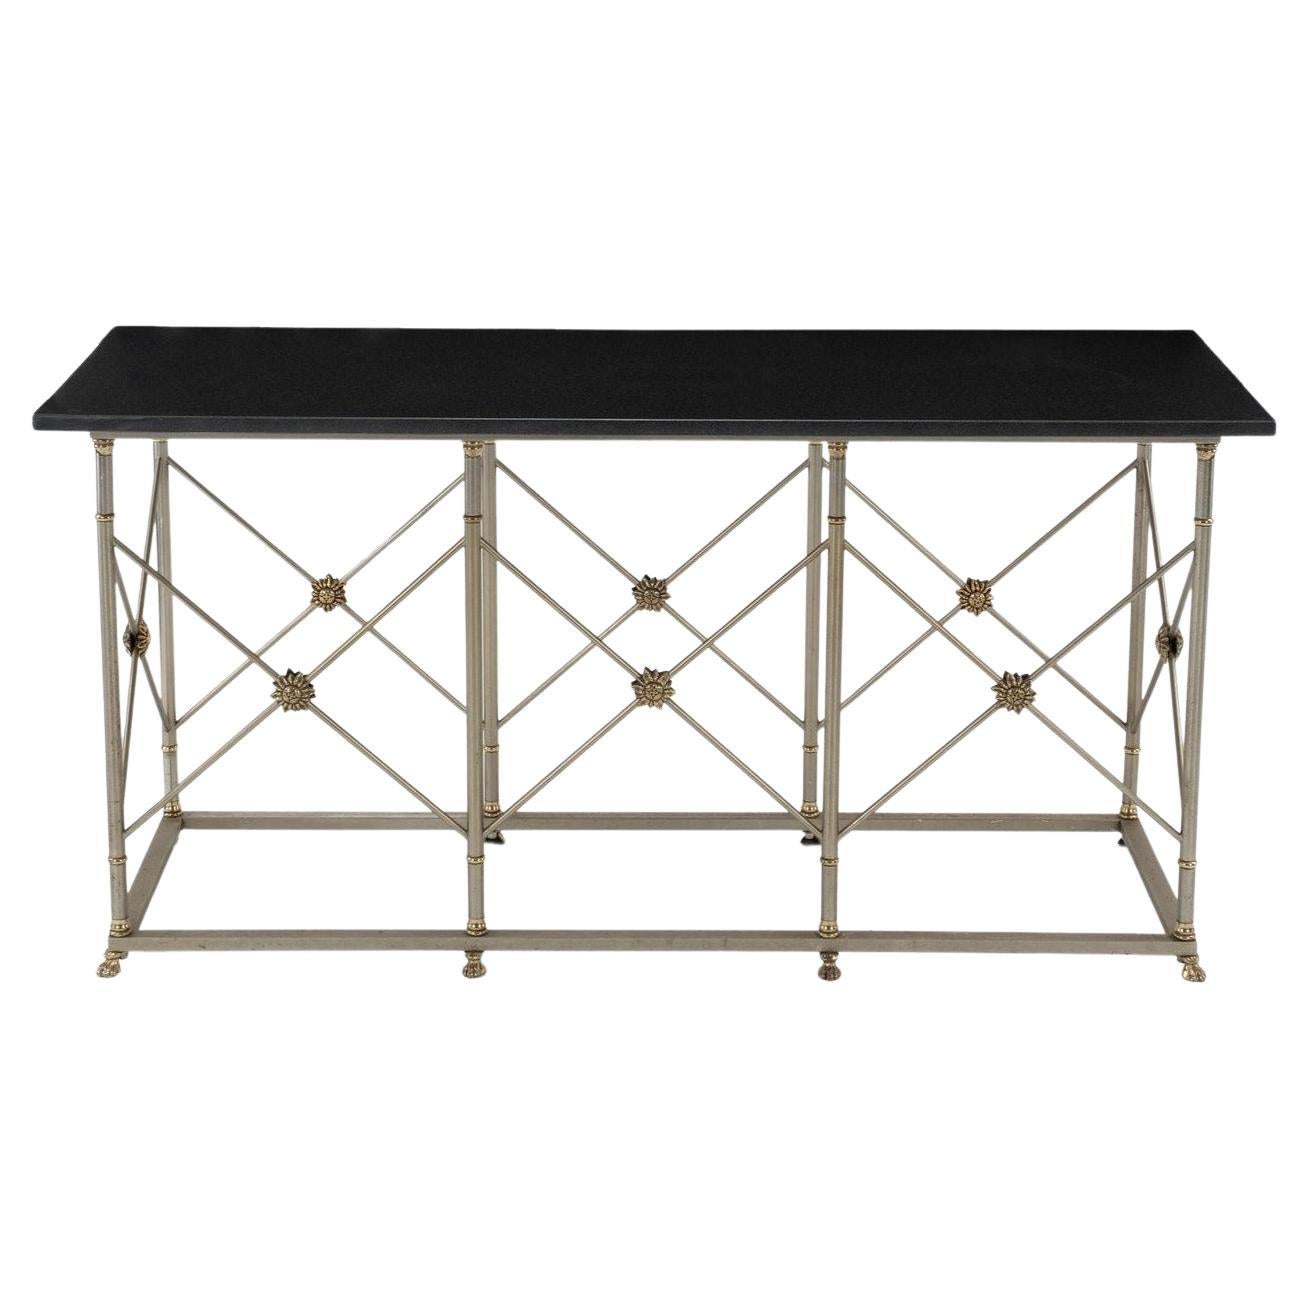 Neoclassical Style Steel Brass Granite Console Tables For Sale